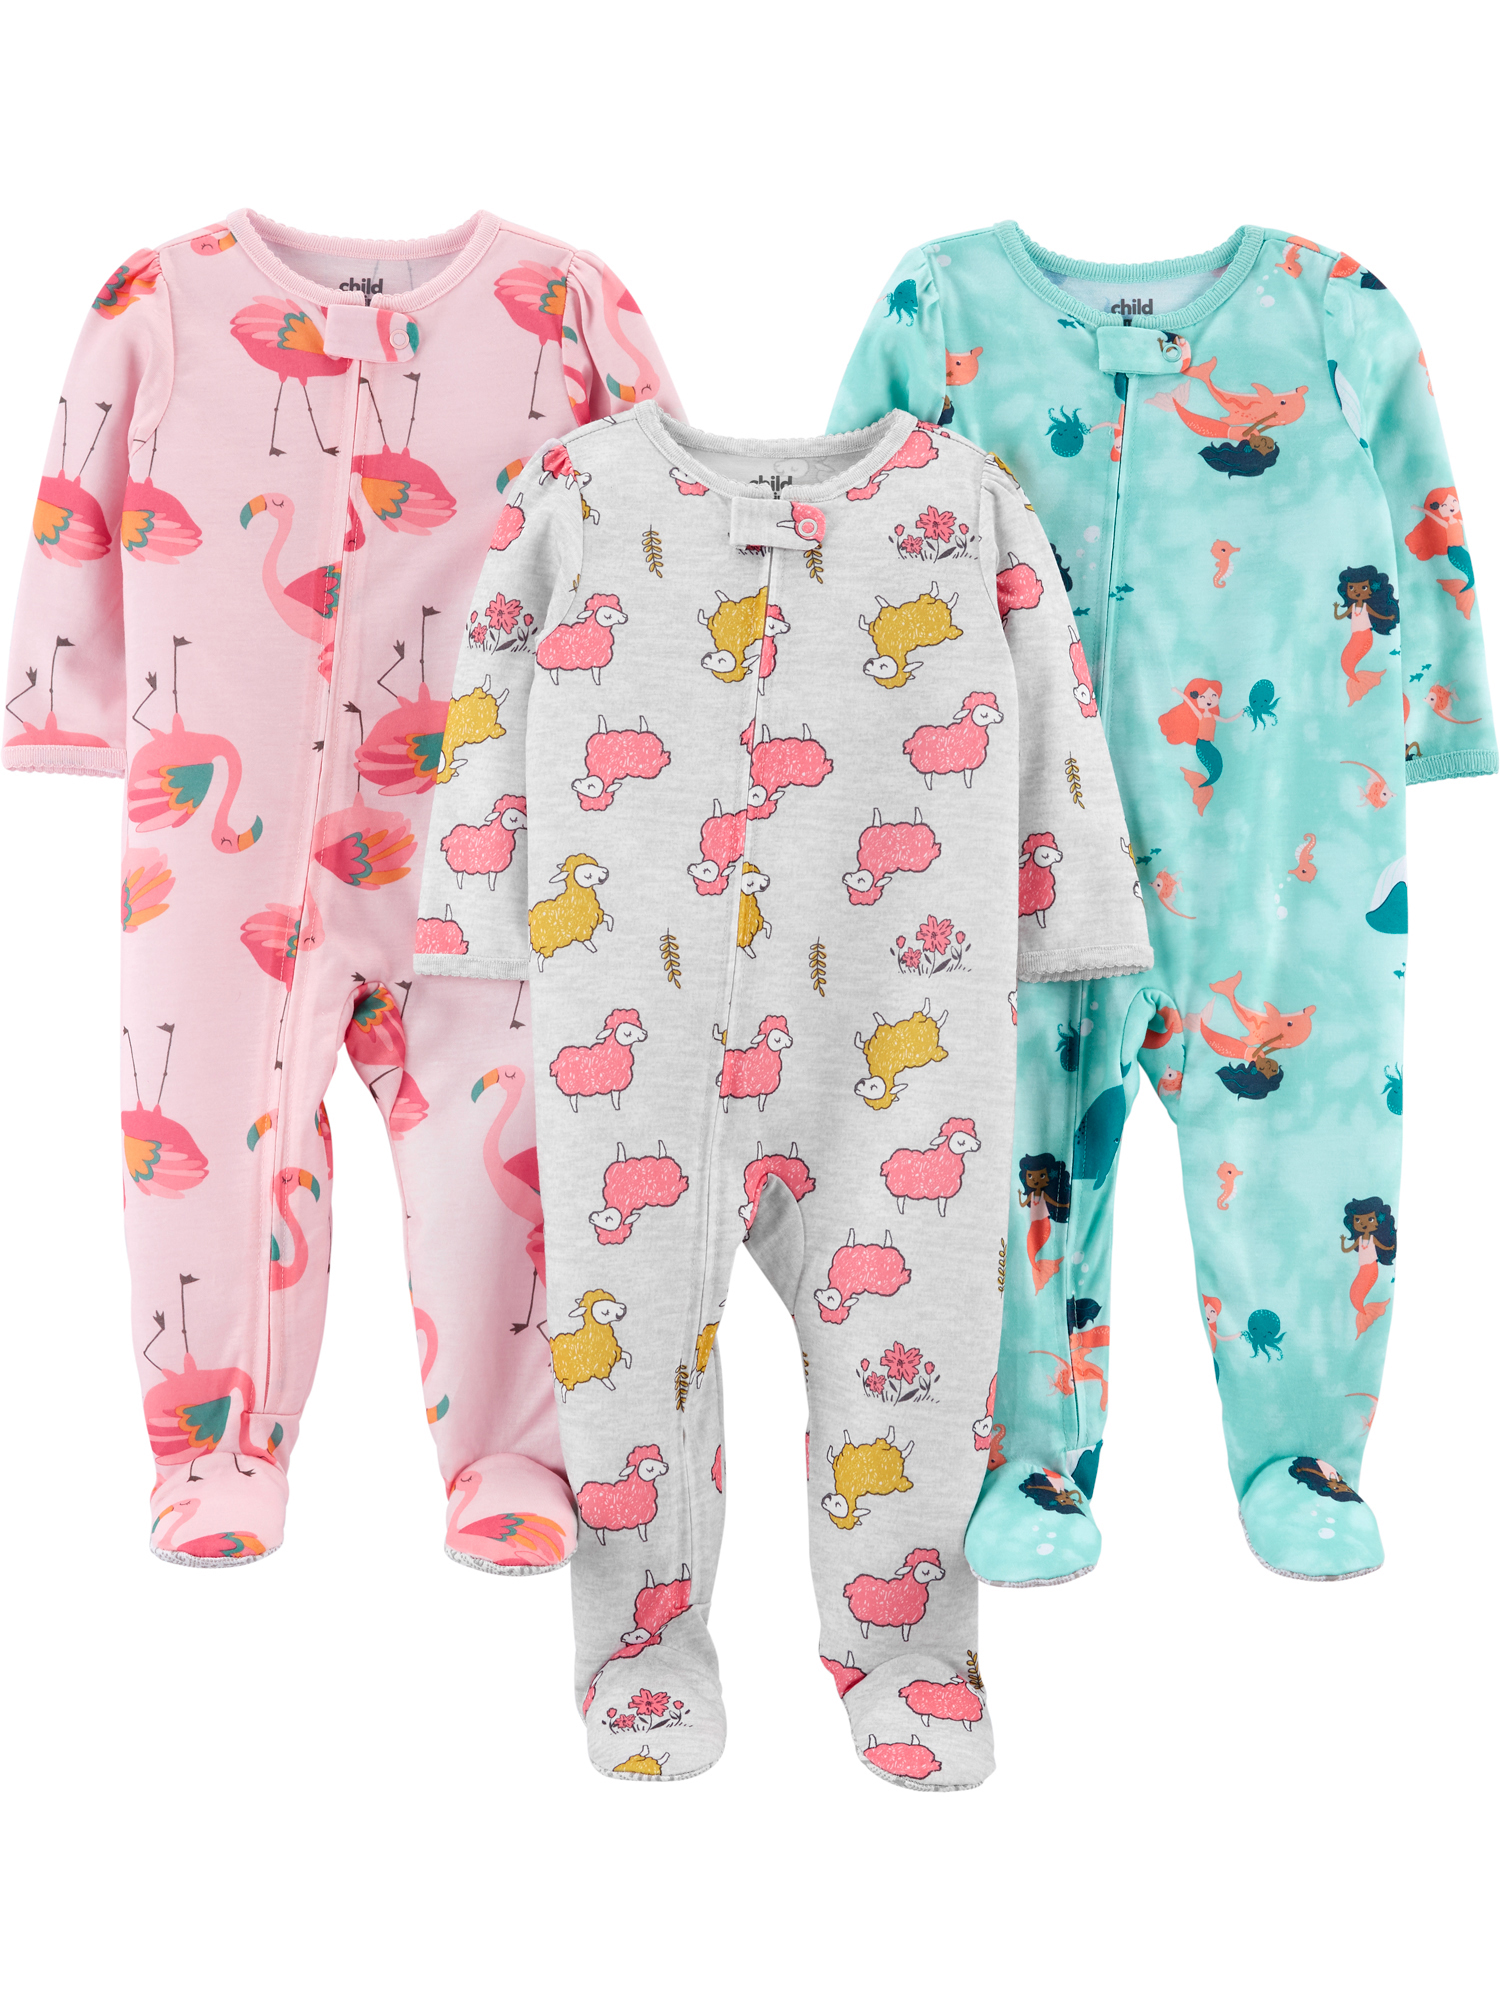 Carter's Child of Mine Baby and Toddler Girl Pajama, One-Piece, 3-Pack, Sizes 12M-4T - image 1 of 10